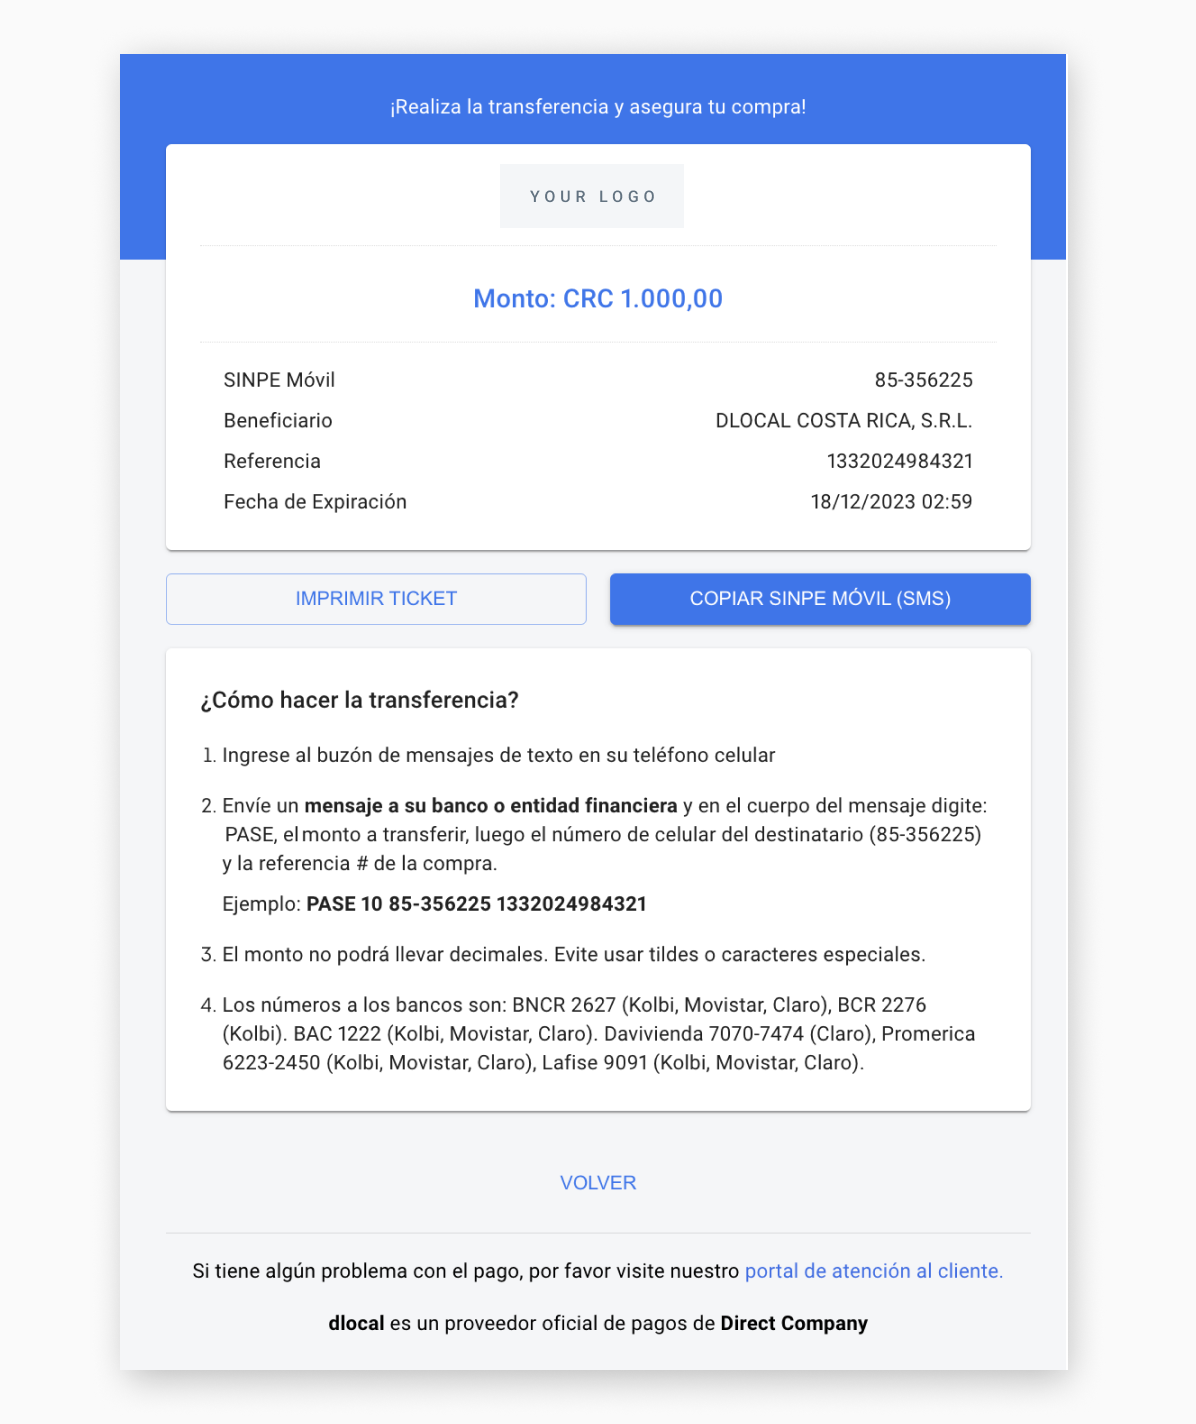 PayCash UI built with the information in the example above.